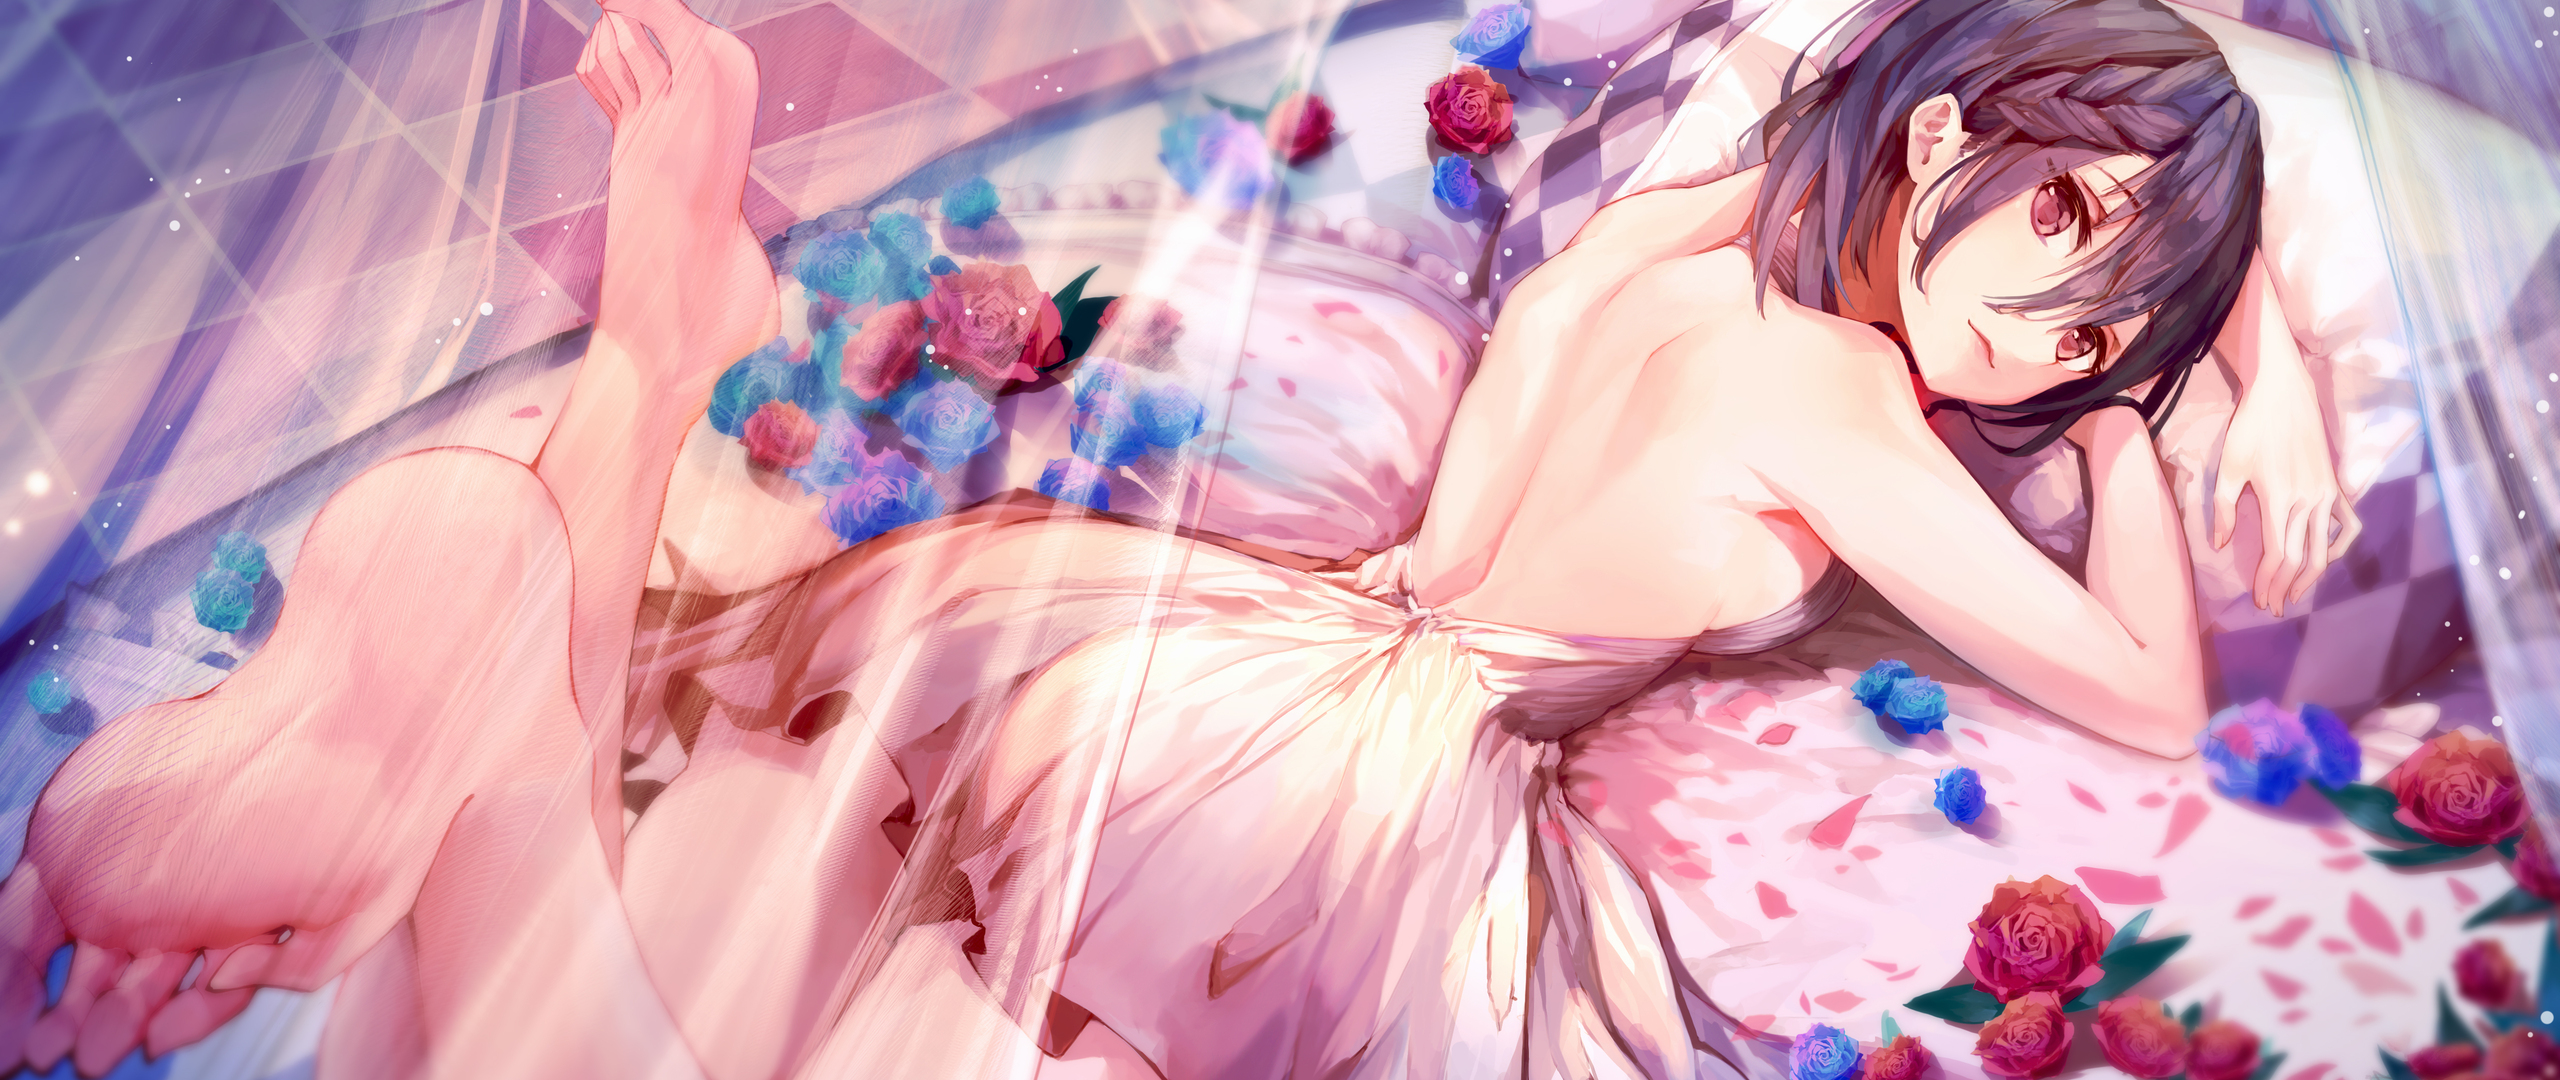 Anime Girl Bed Lying Down In 2560x1080 Resolution. 